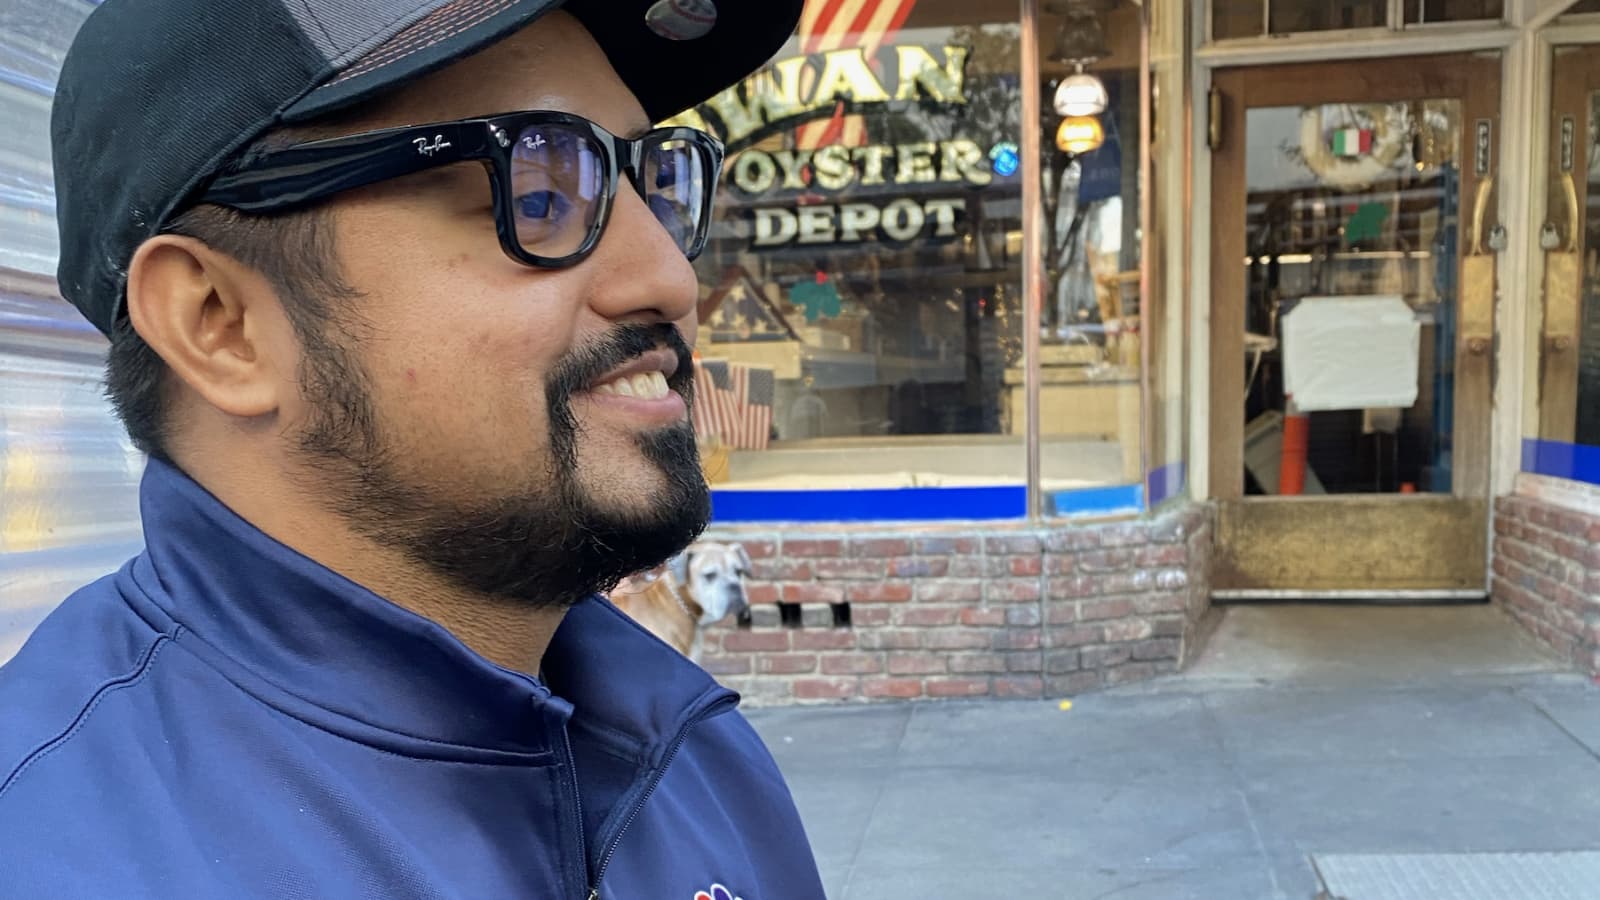 Facebook Ray-Ban Stories smart glasses review